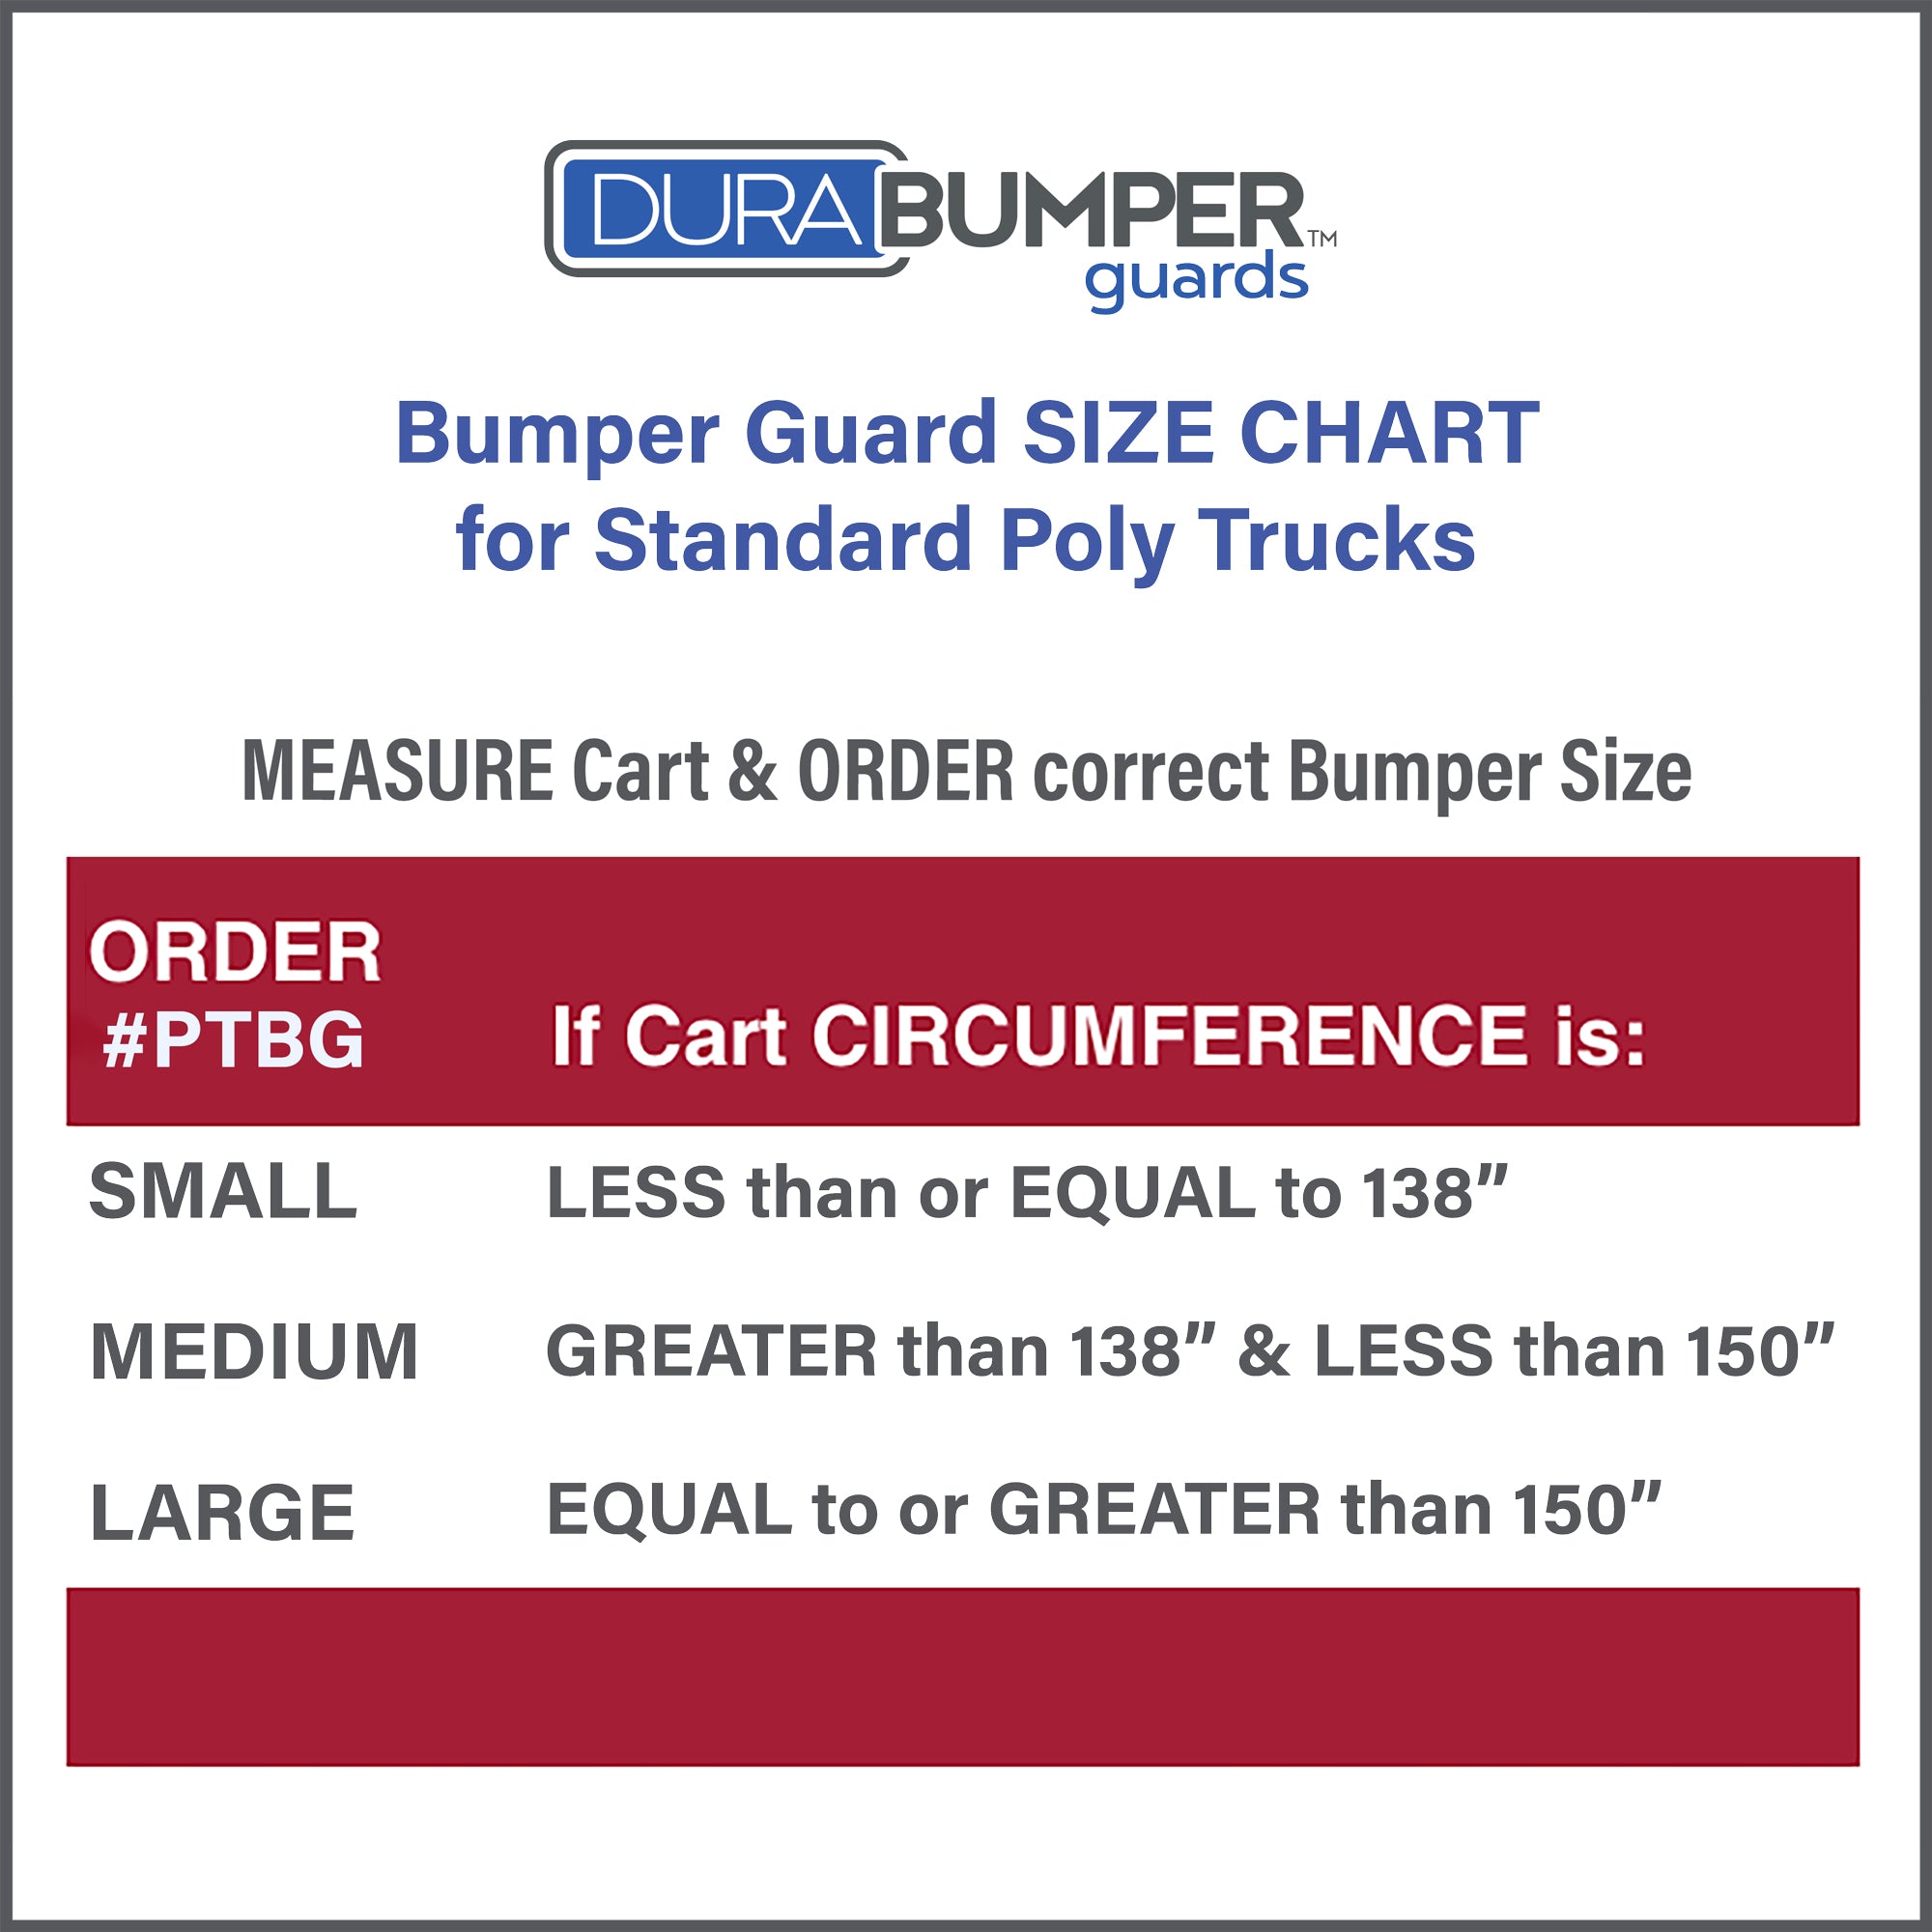 Bumper Guard for Housekeeping Carts, Protect Walls from Cart Damage